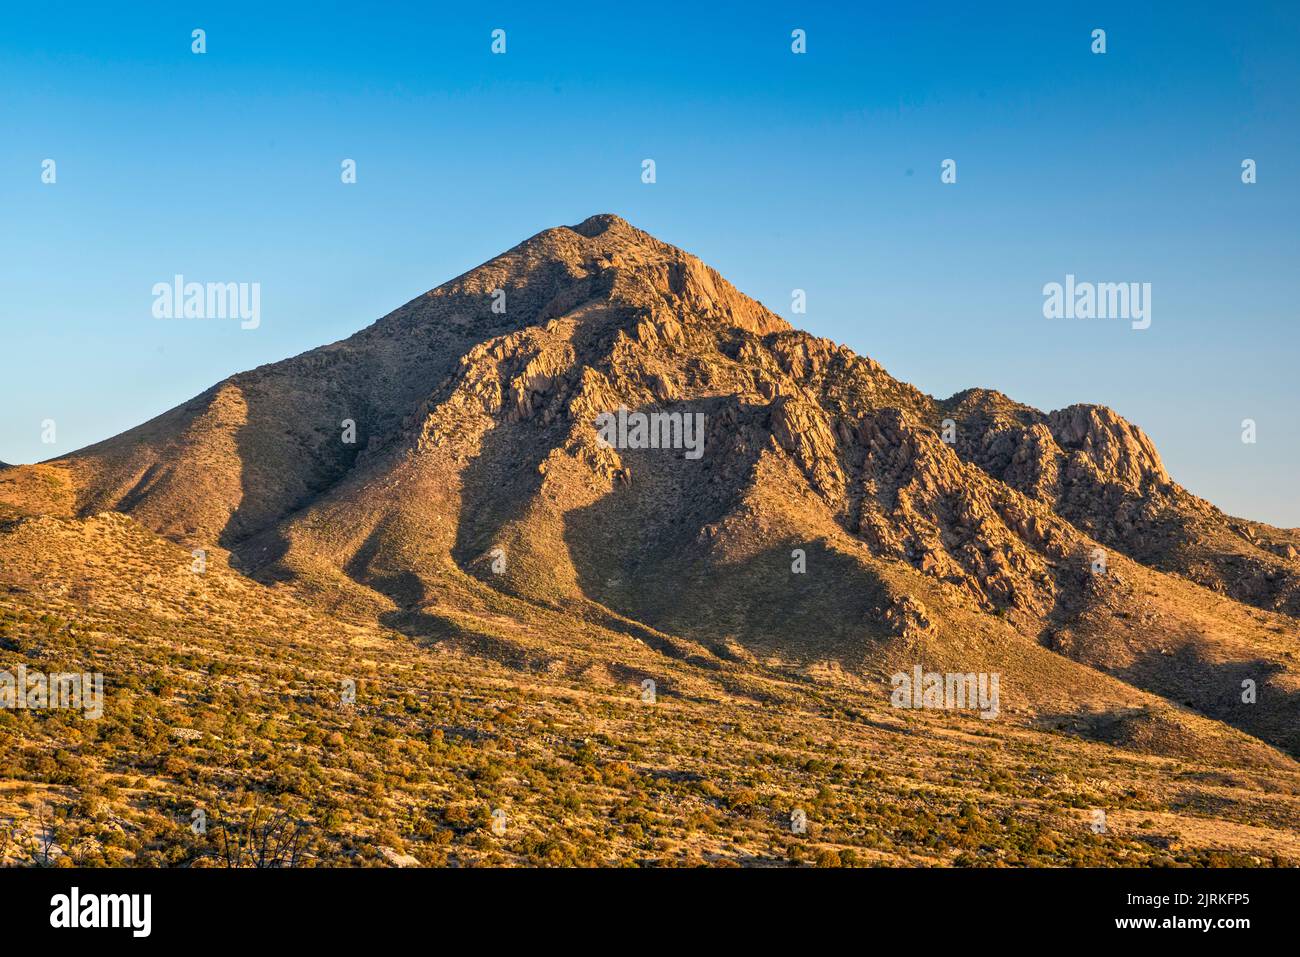 Baylor Peak at Organ Mtns at sunrise, from Pine Tree Trail, Aguirre Spring Recreation Area, Organ Mountains Desert Peaks Natl Monument, New Mexico Stock Photo